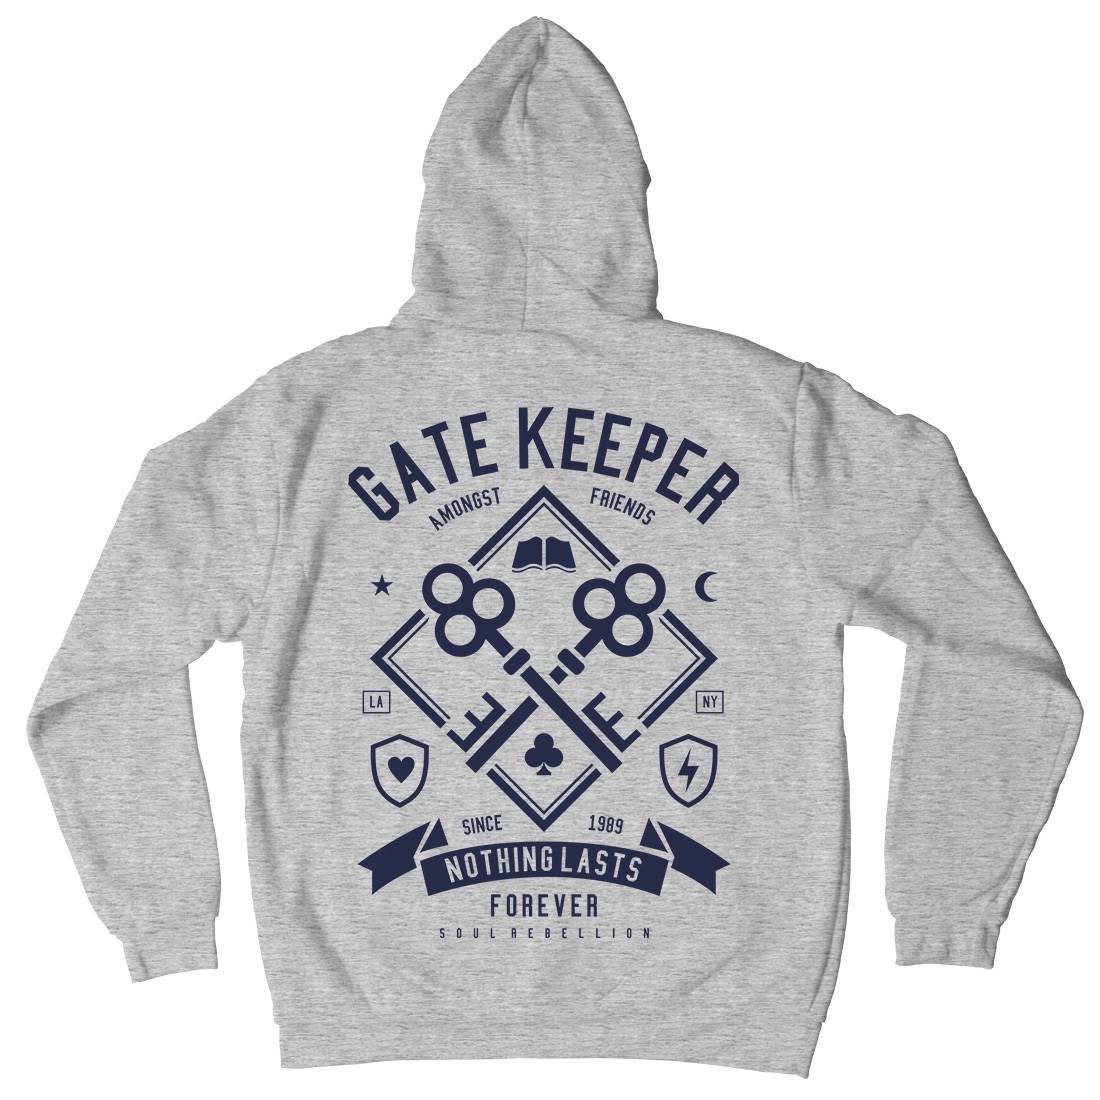 Gate Keeper Mens Hoodie With Pocket Quotes A232